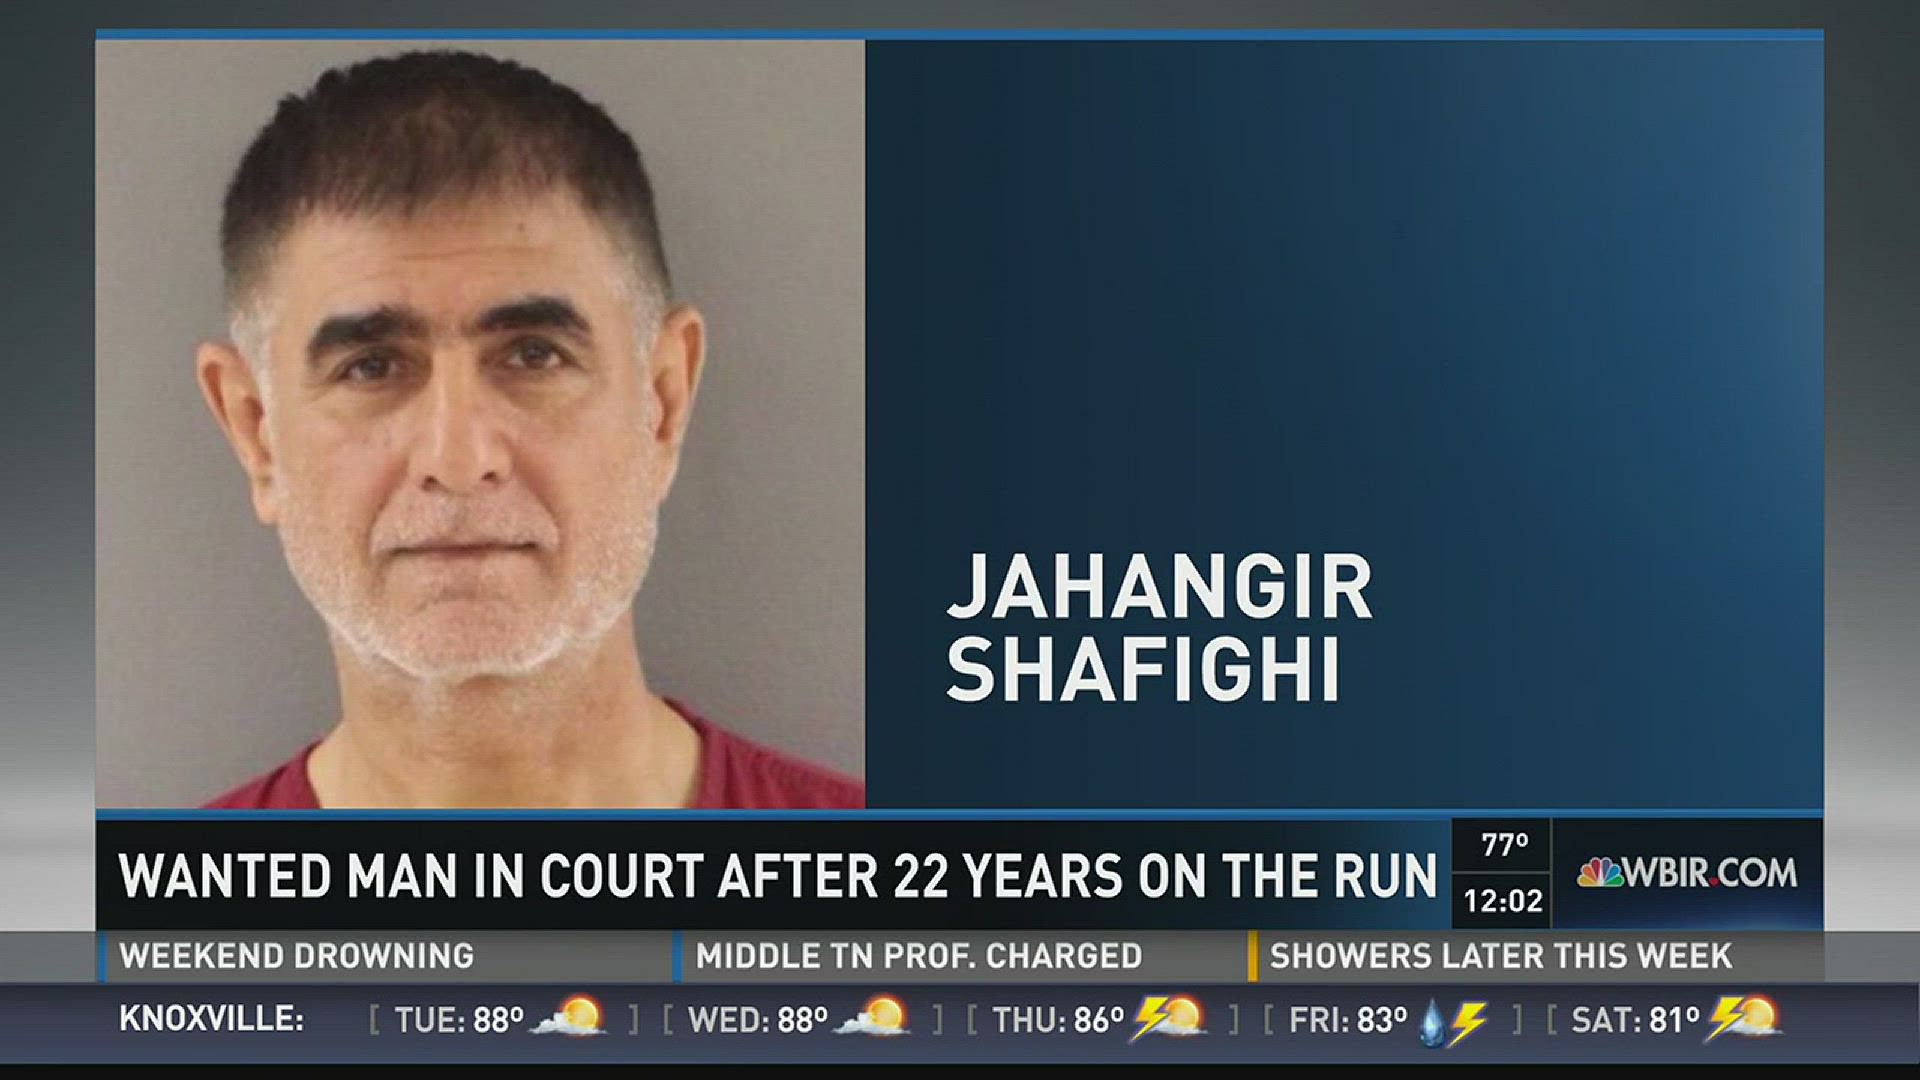 Jahangir Shafighi's trial is set for Oct. 18. Shafighi fled to Dubai in 1994.